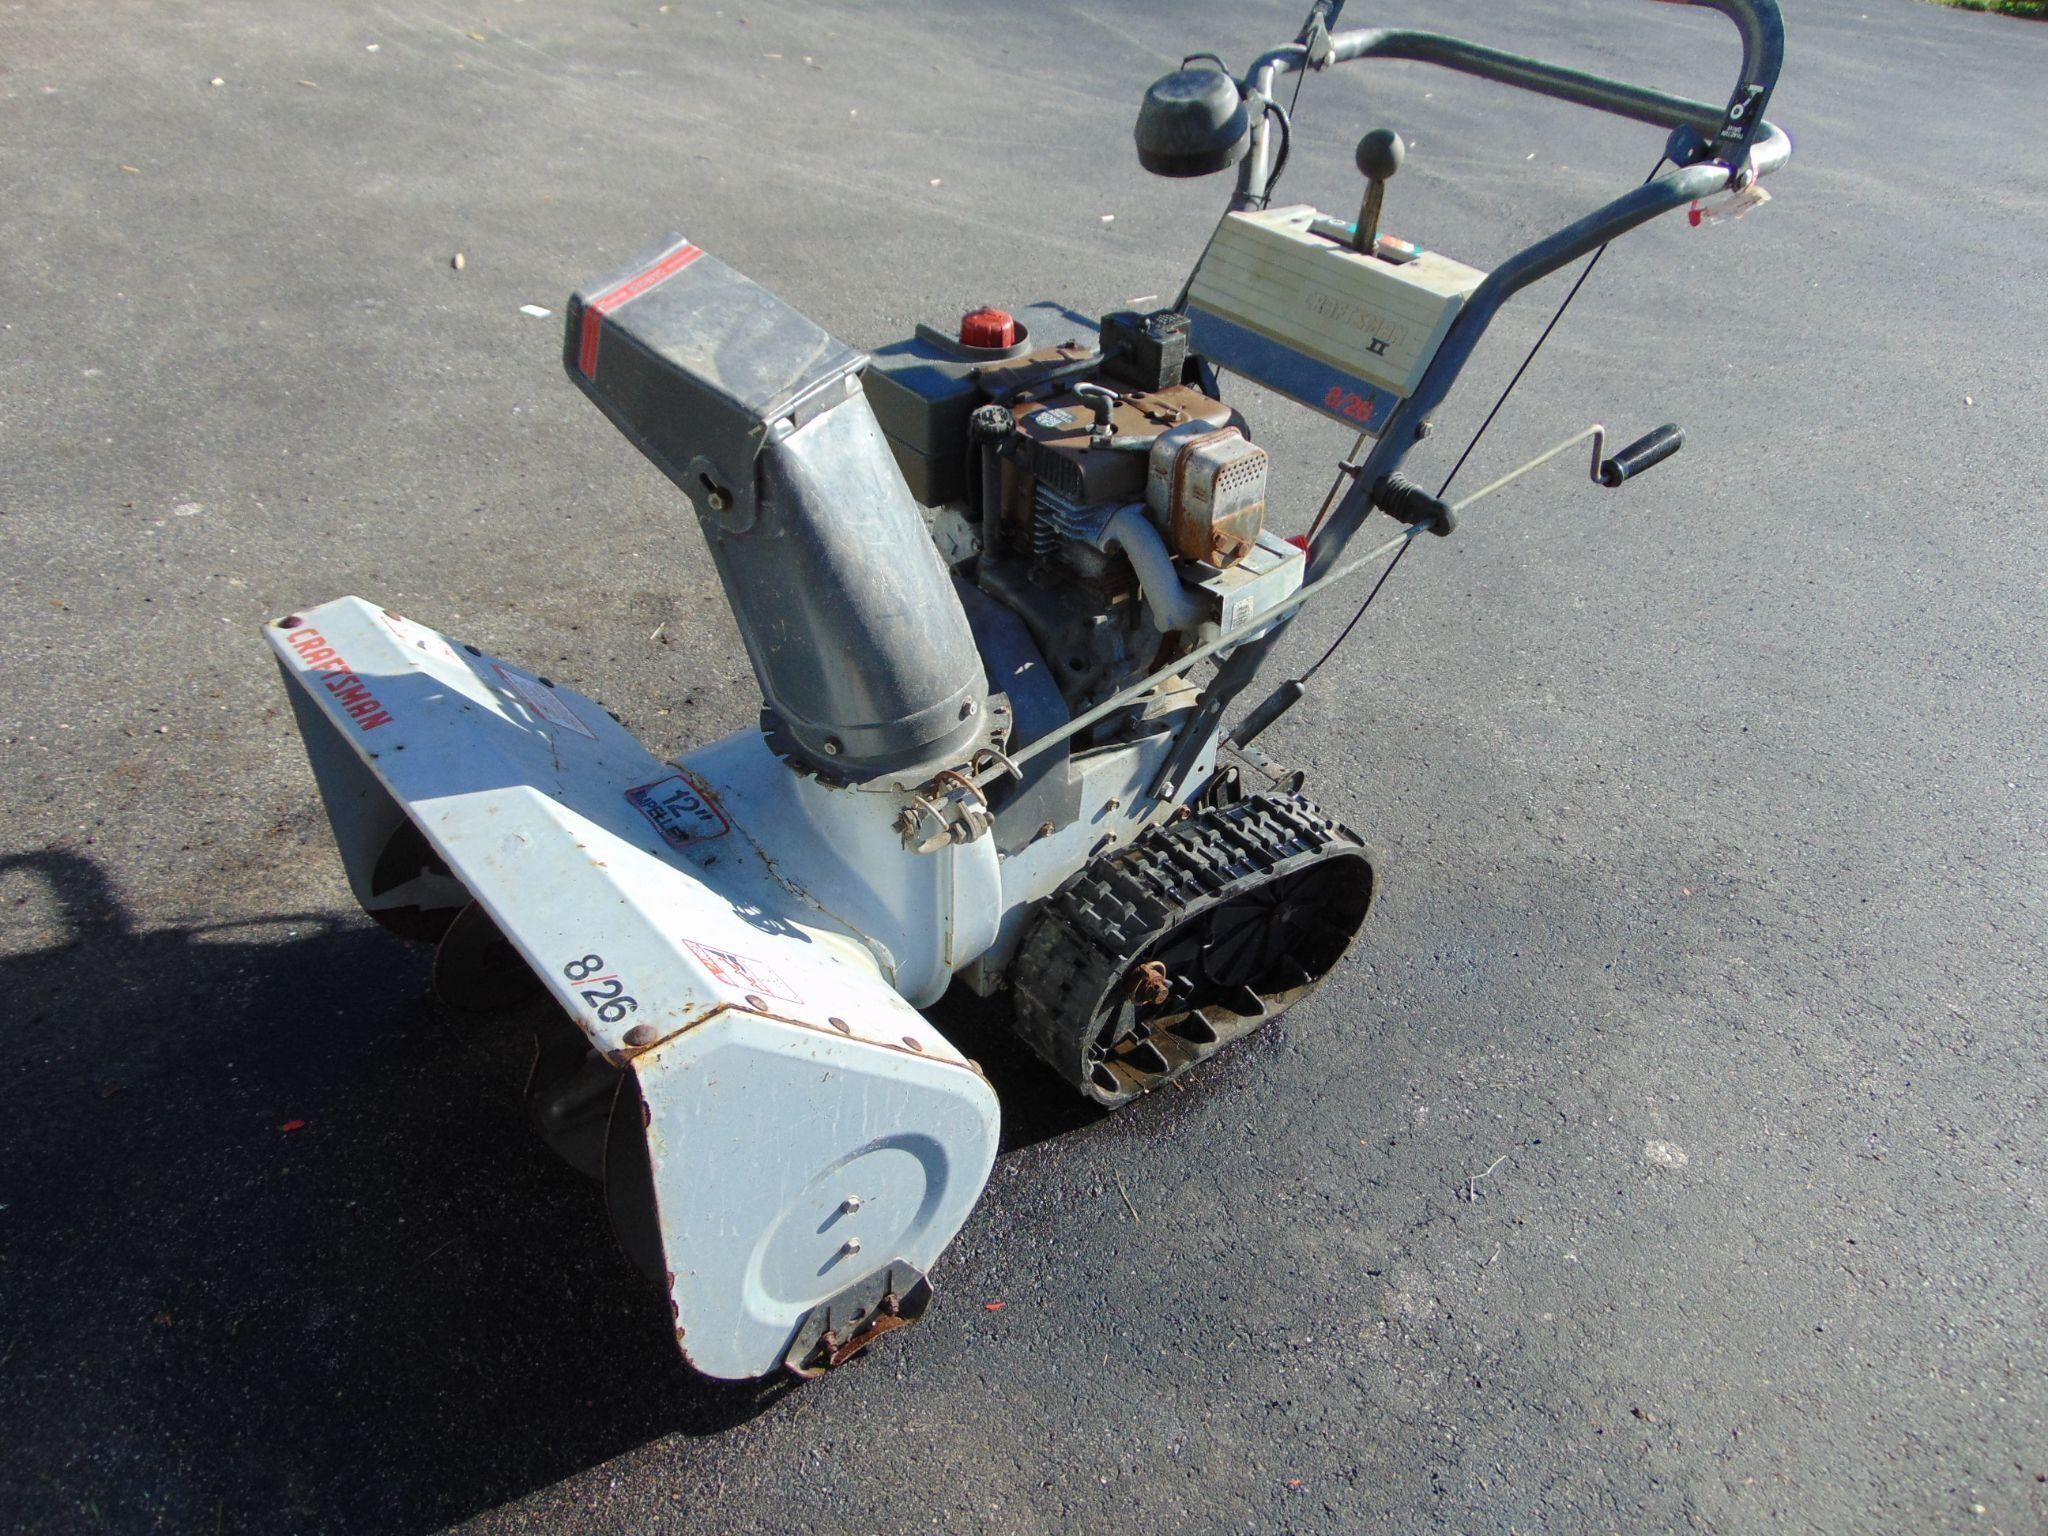 Tracked snowblower. Likely needs work.